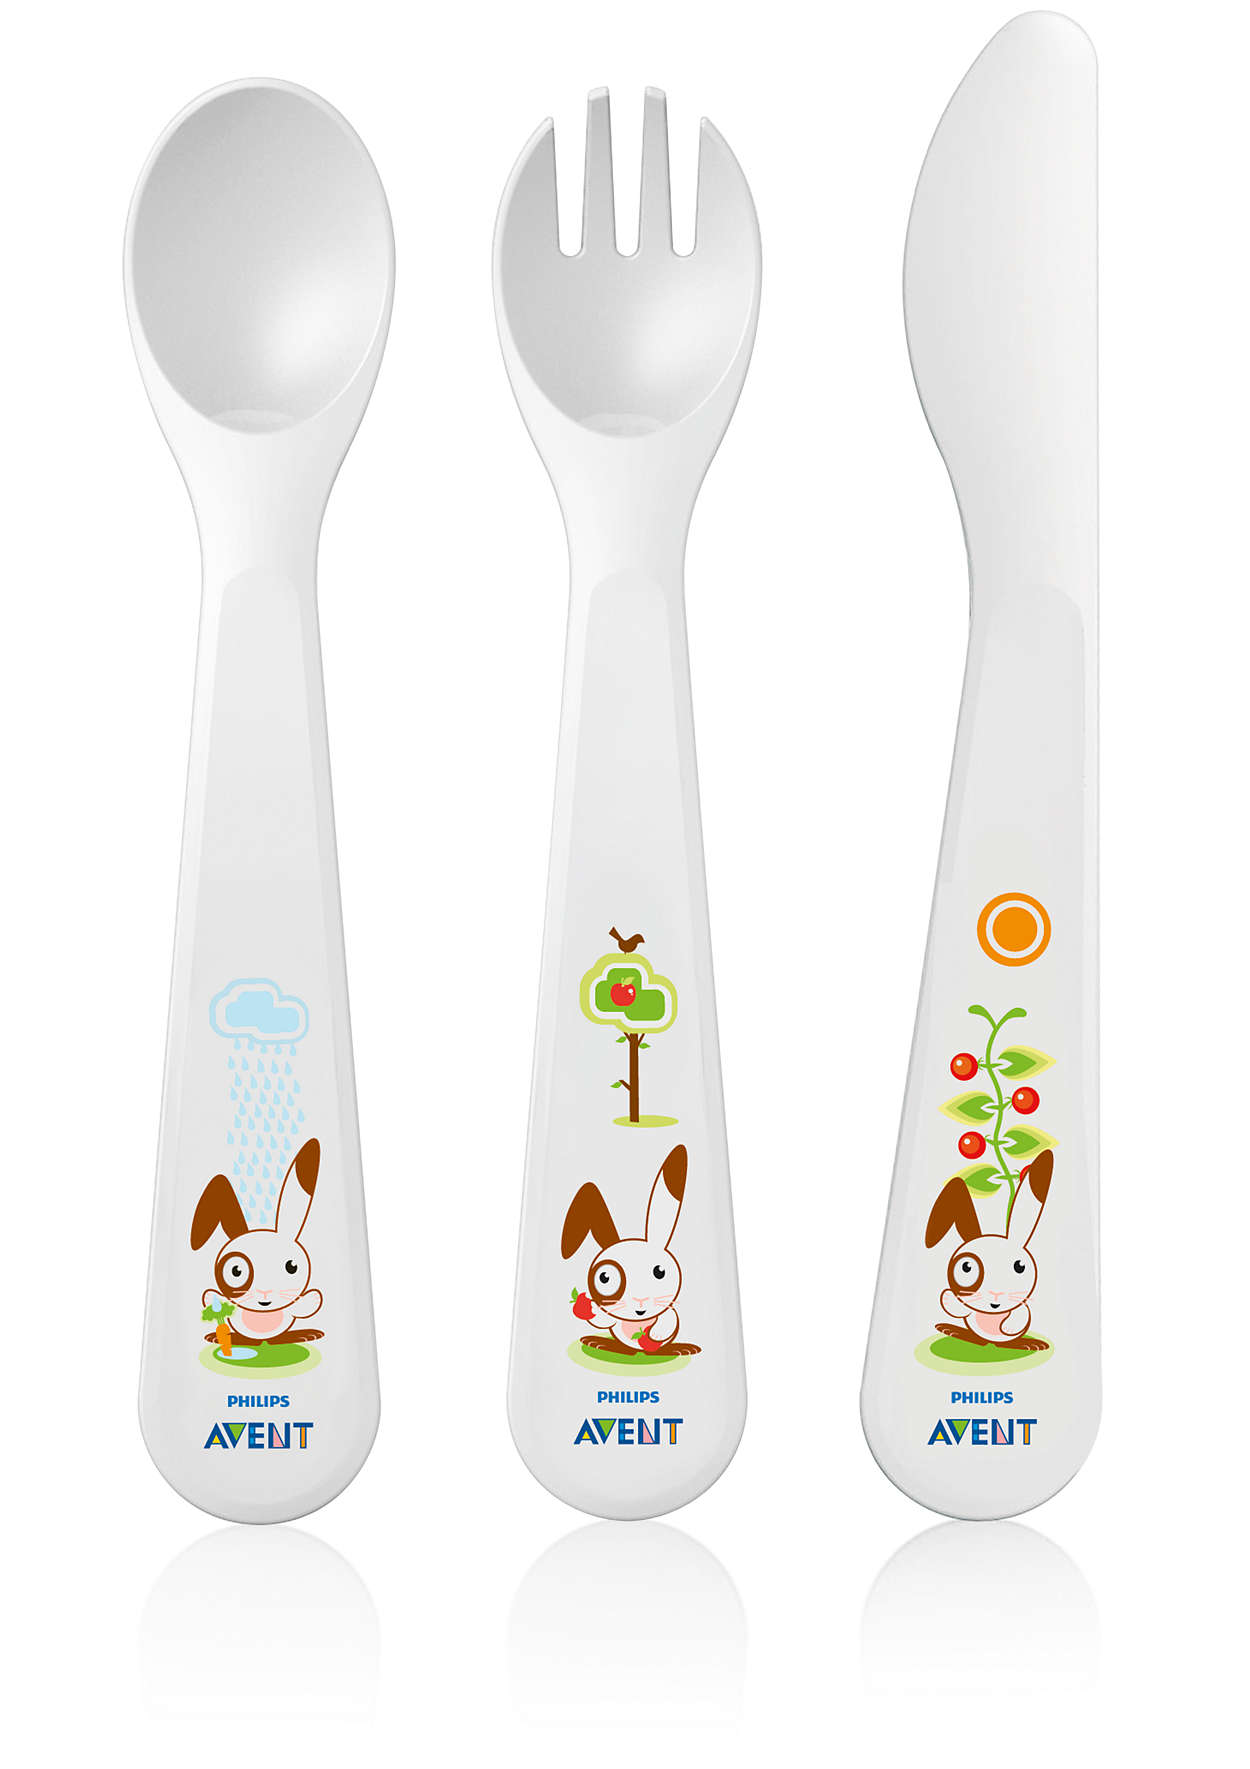 Toddler cutlery set for independent eating